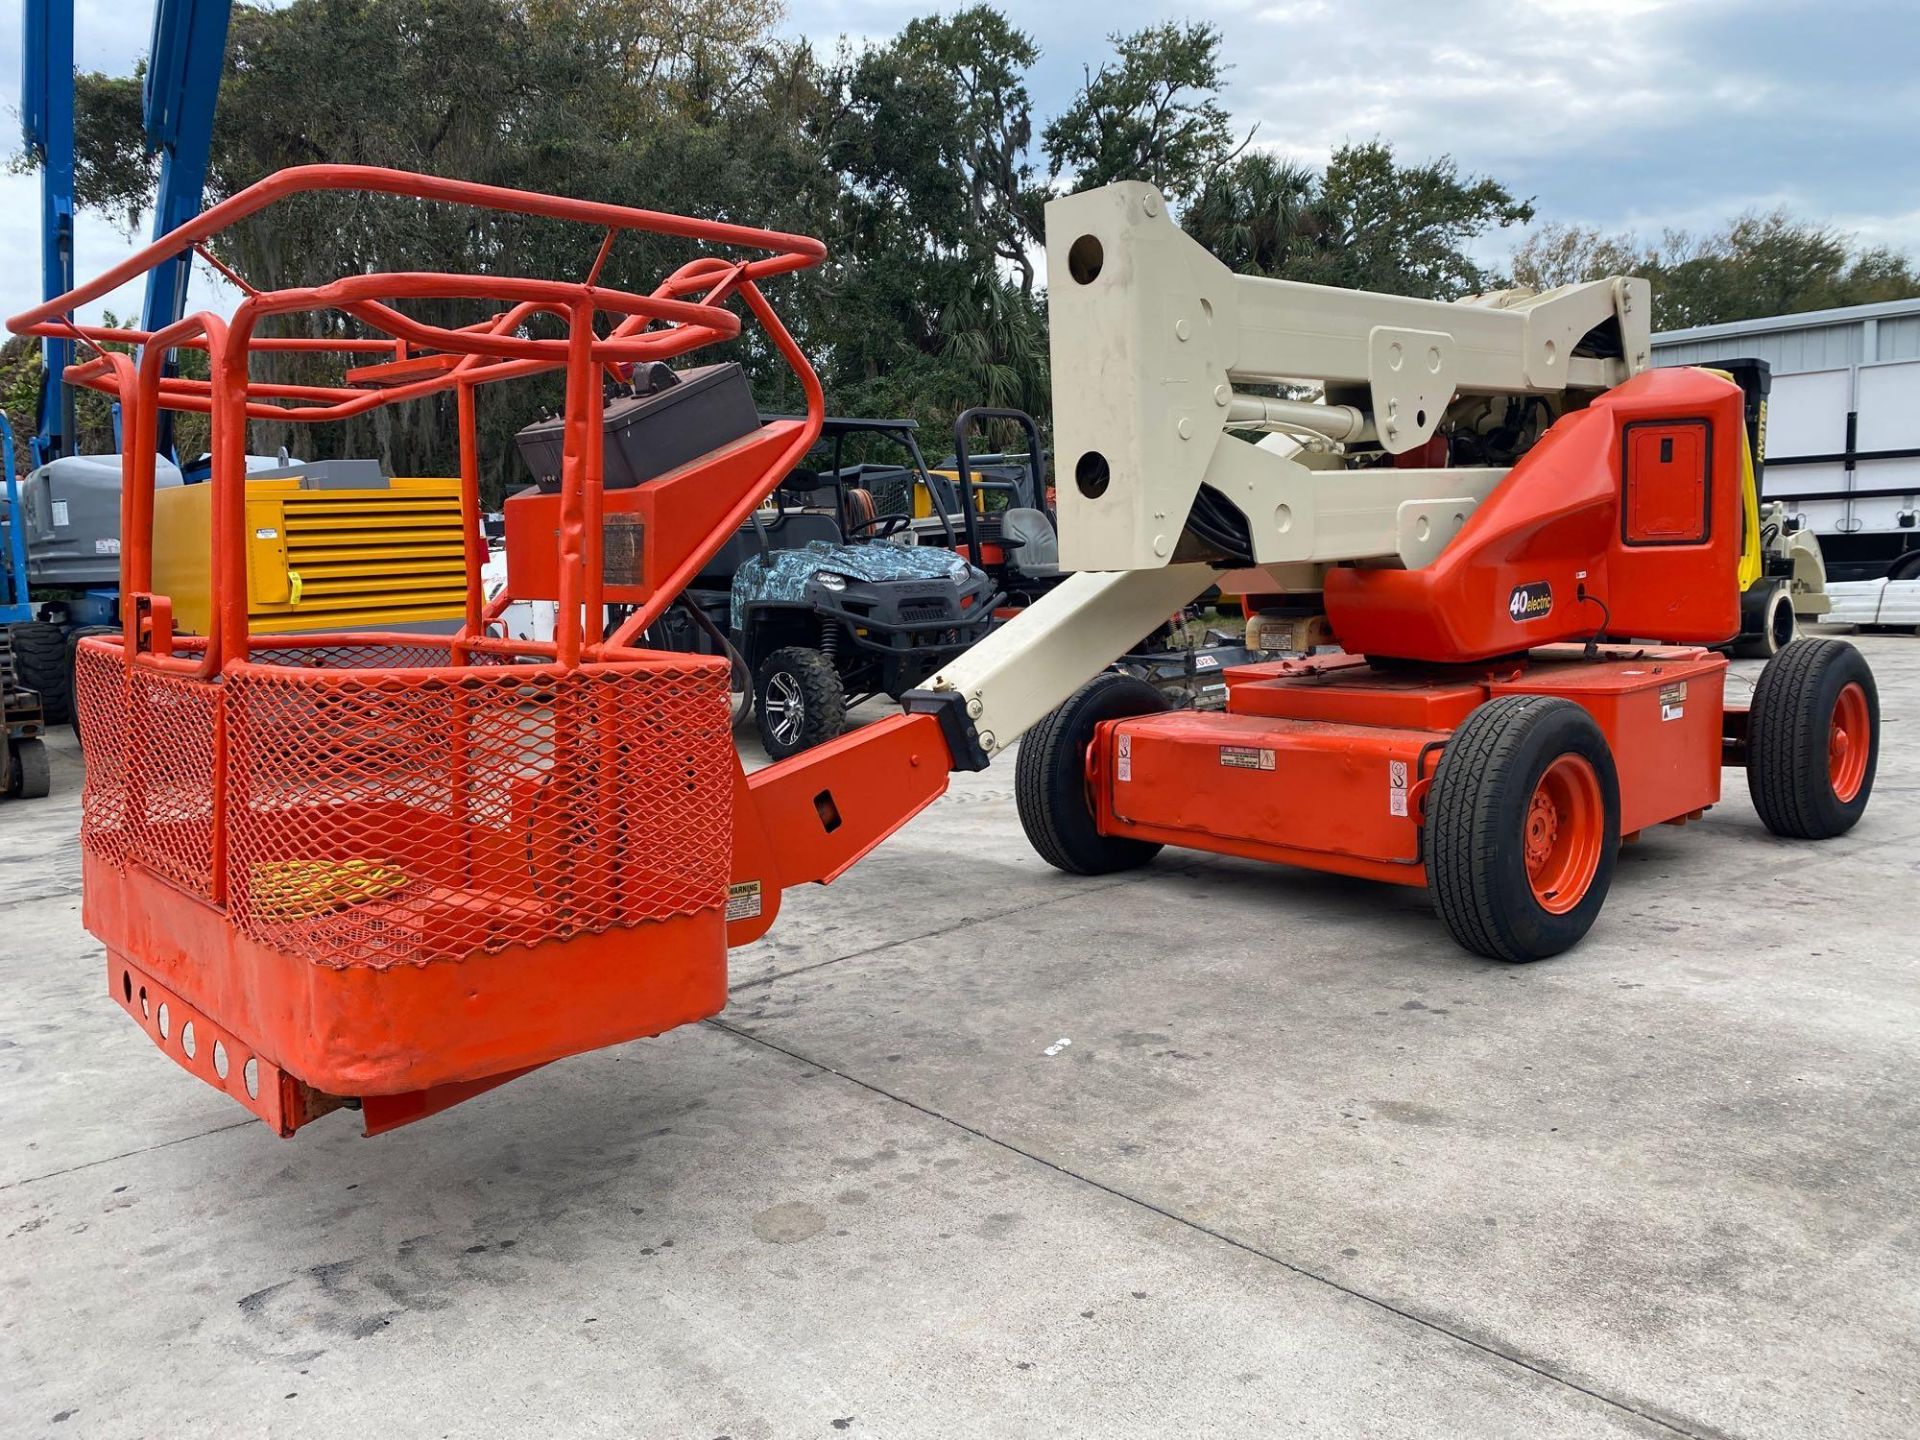 JLG 40 ELECTRIC MAN LIFT, FOAM FILLED TIRES, 40' PLATFORM HEIGHT, BUILT IN BATTERY CHARGER - Image 2 of 10